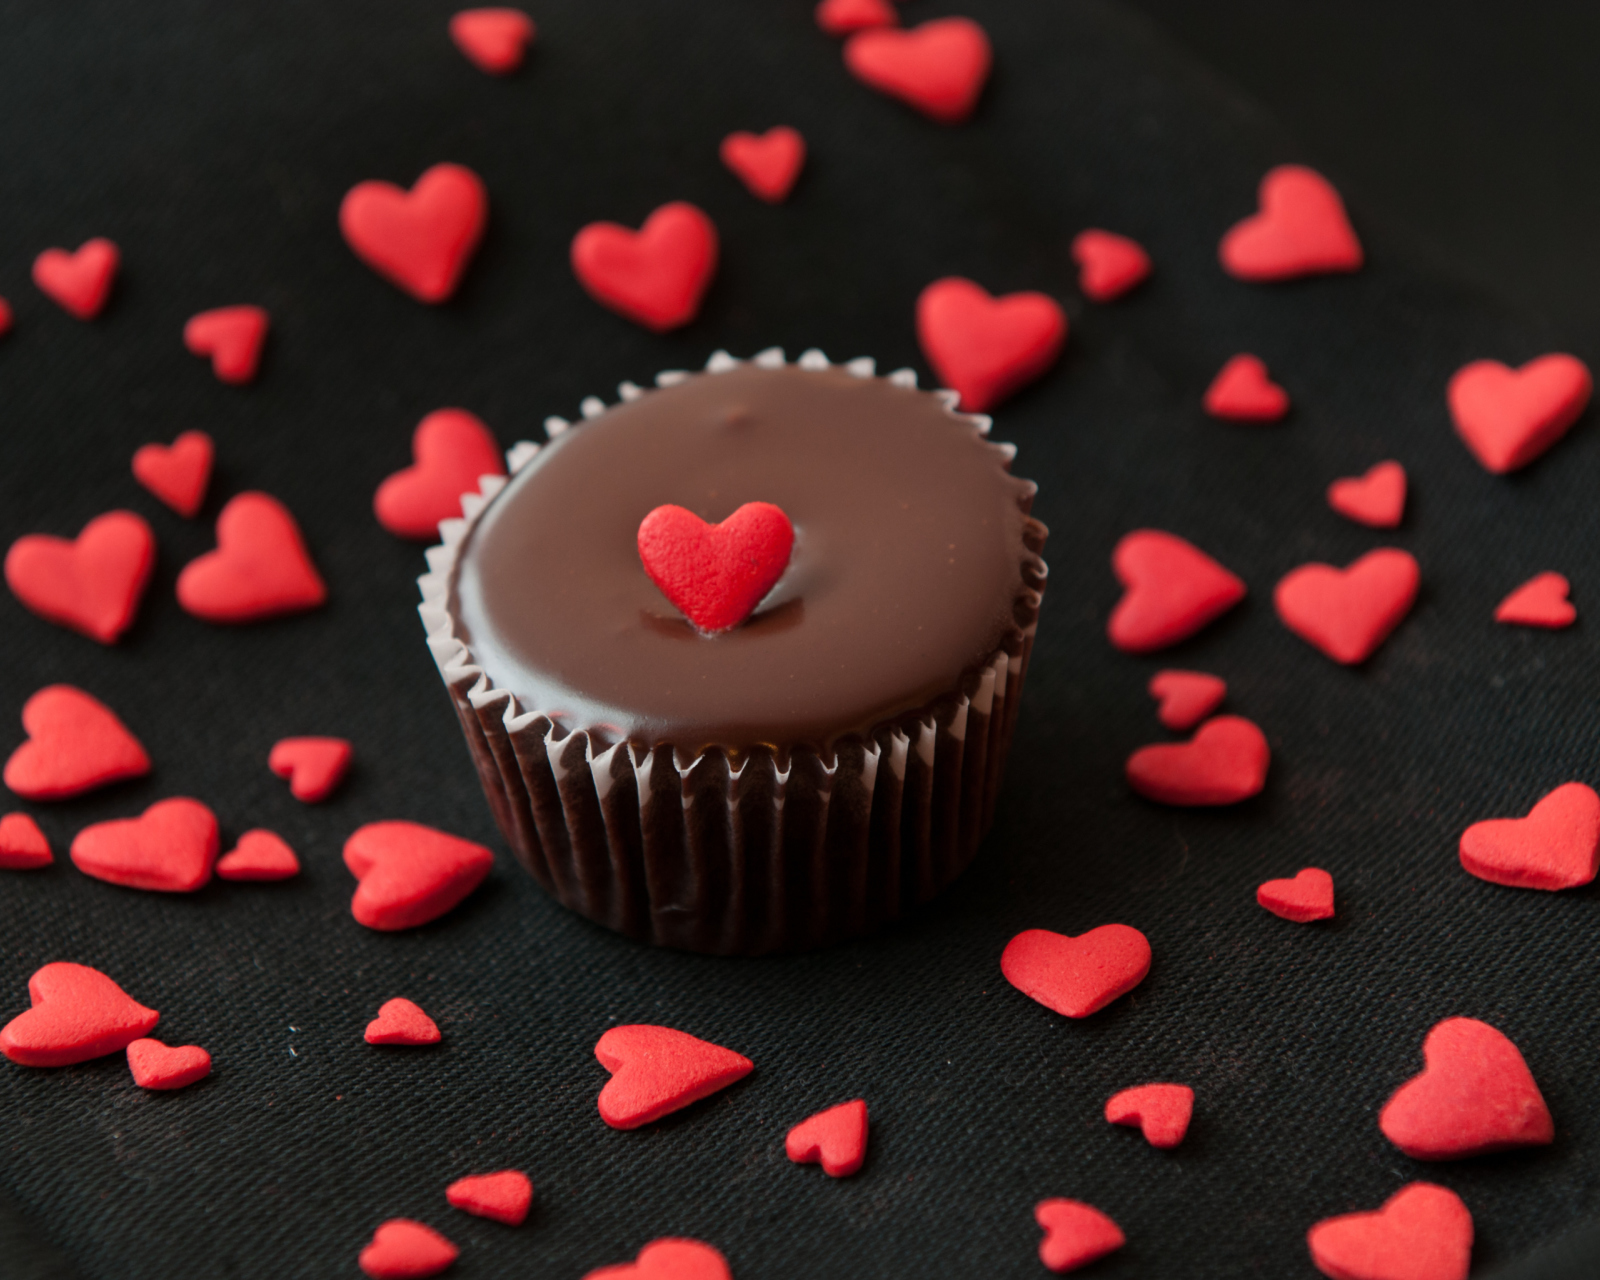 Chocolate Cupcake With Red Heart wallpaper 1600x1280